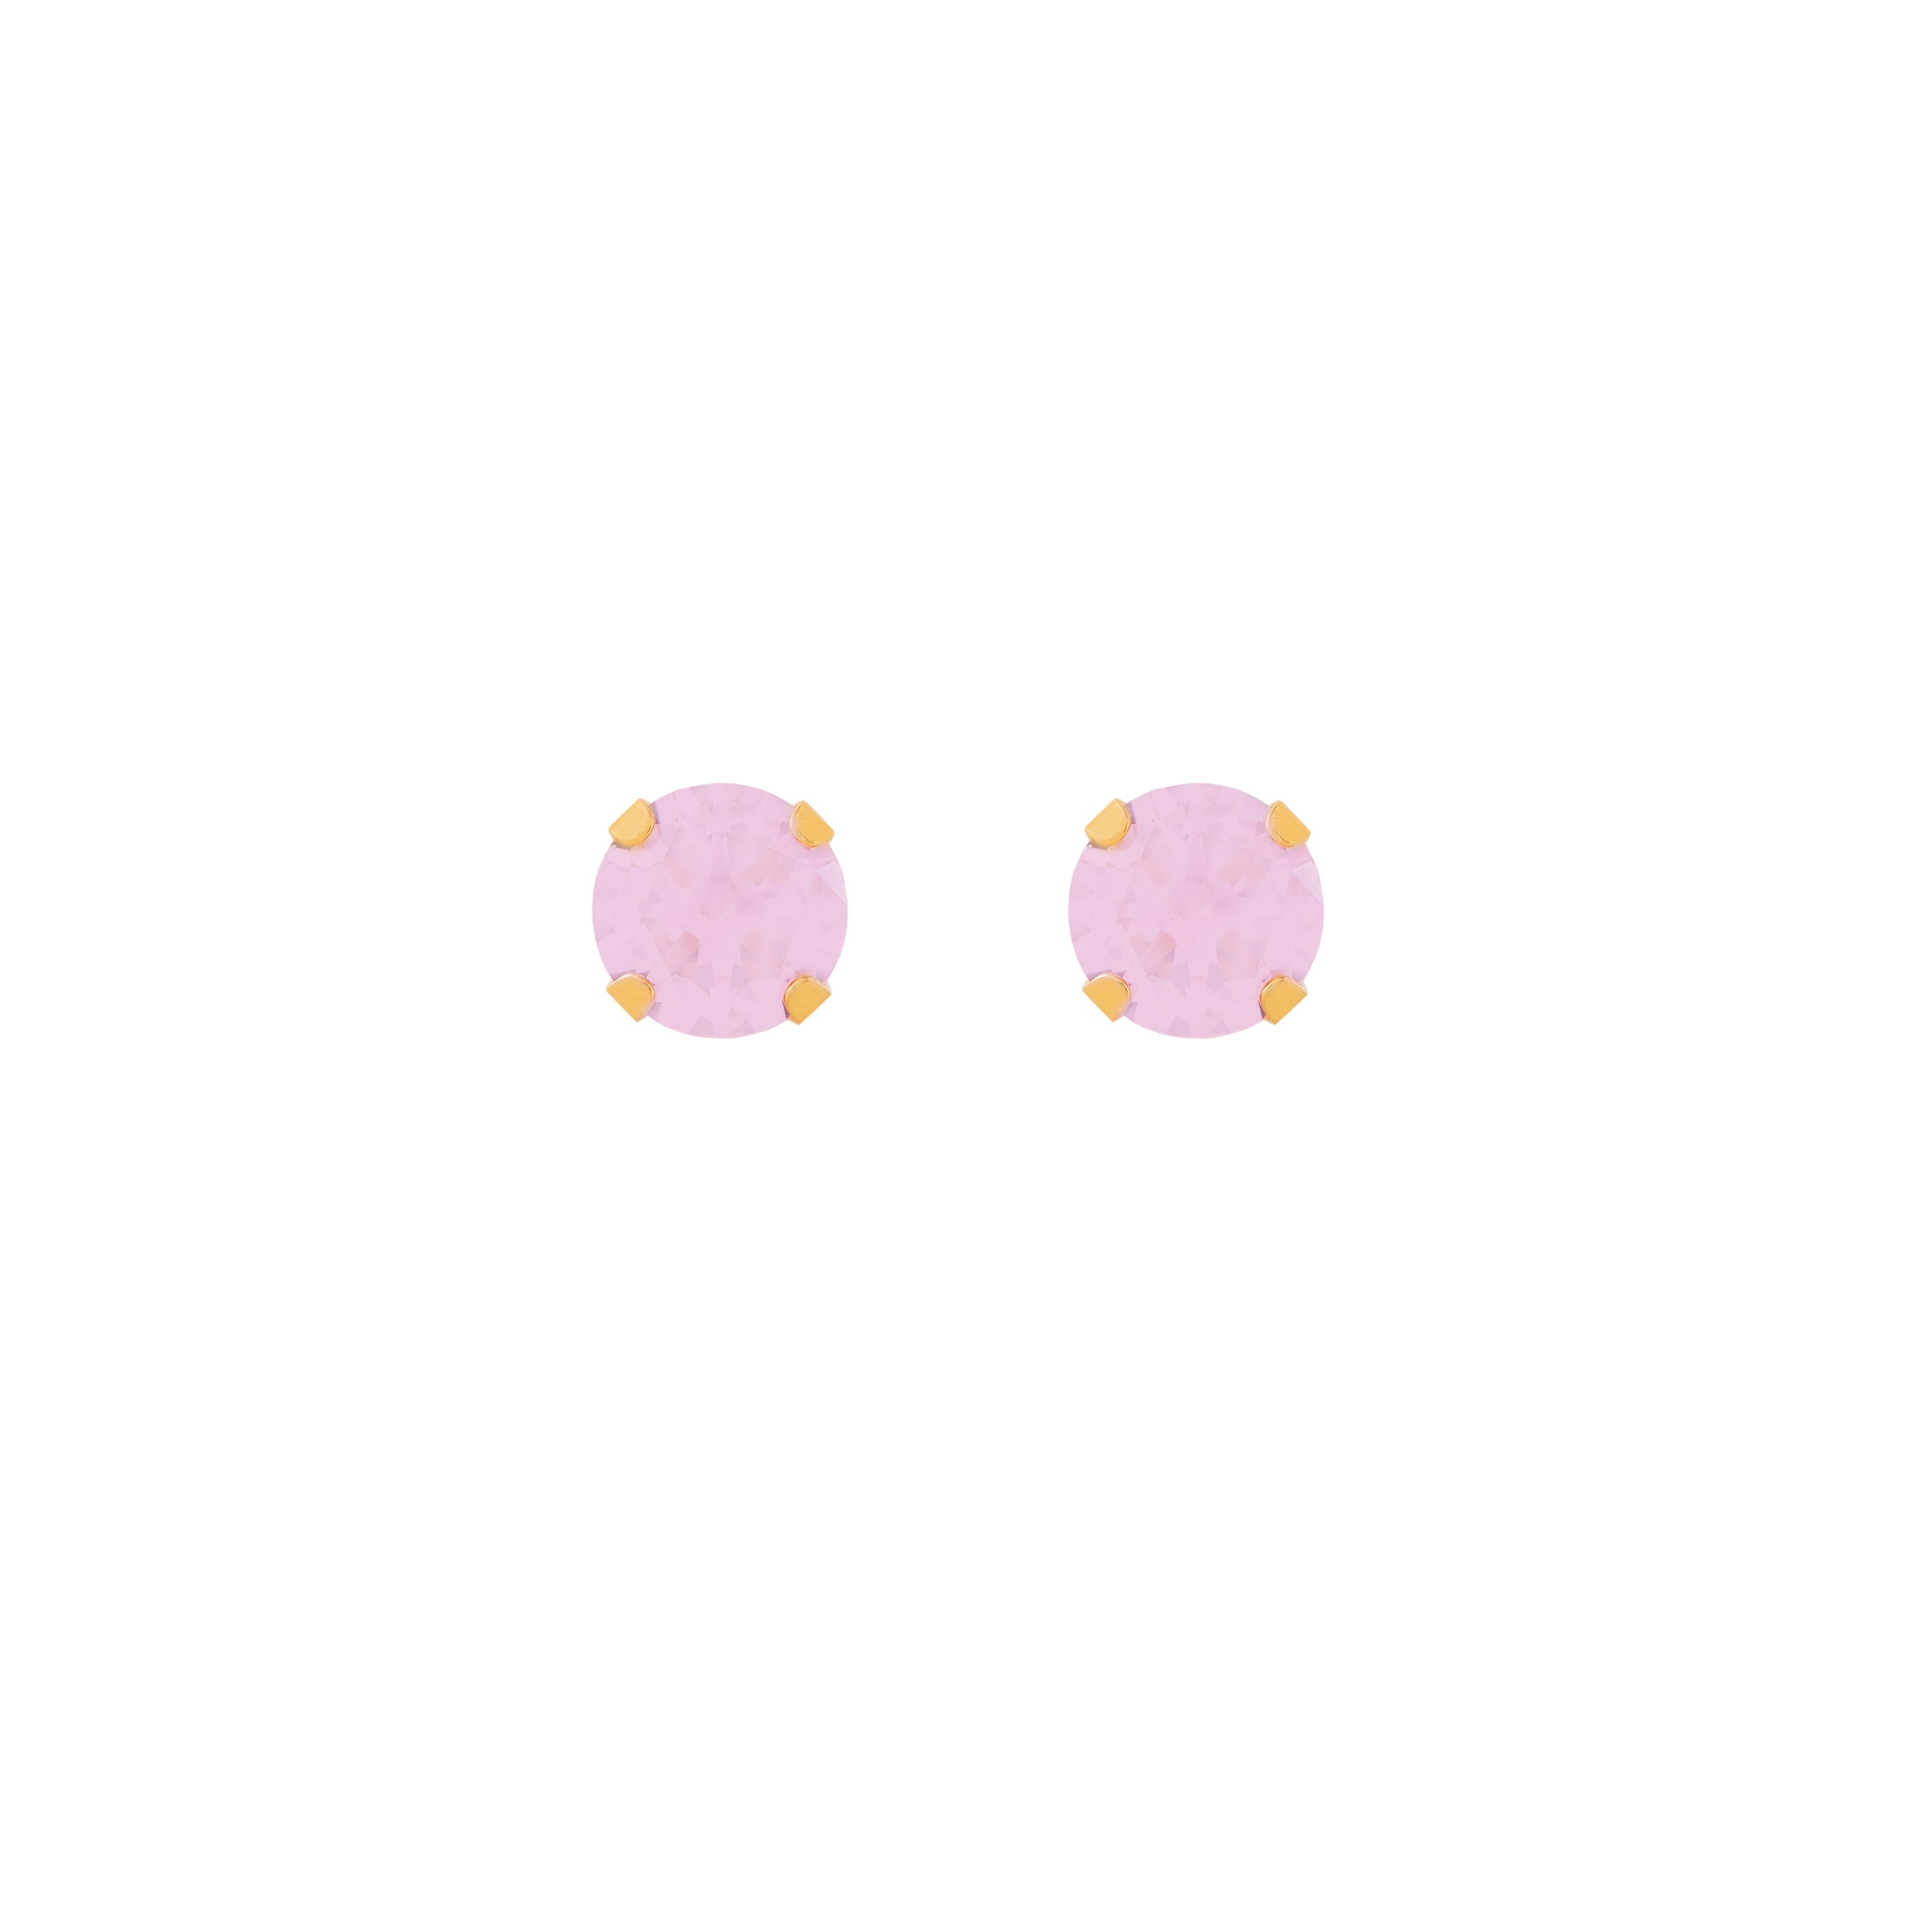 6MM Pink Cubic Zirconia 24K Pure Gold Plated Ear Studs | MADE IN USA | Ideal for everyday wear